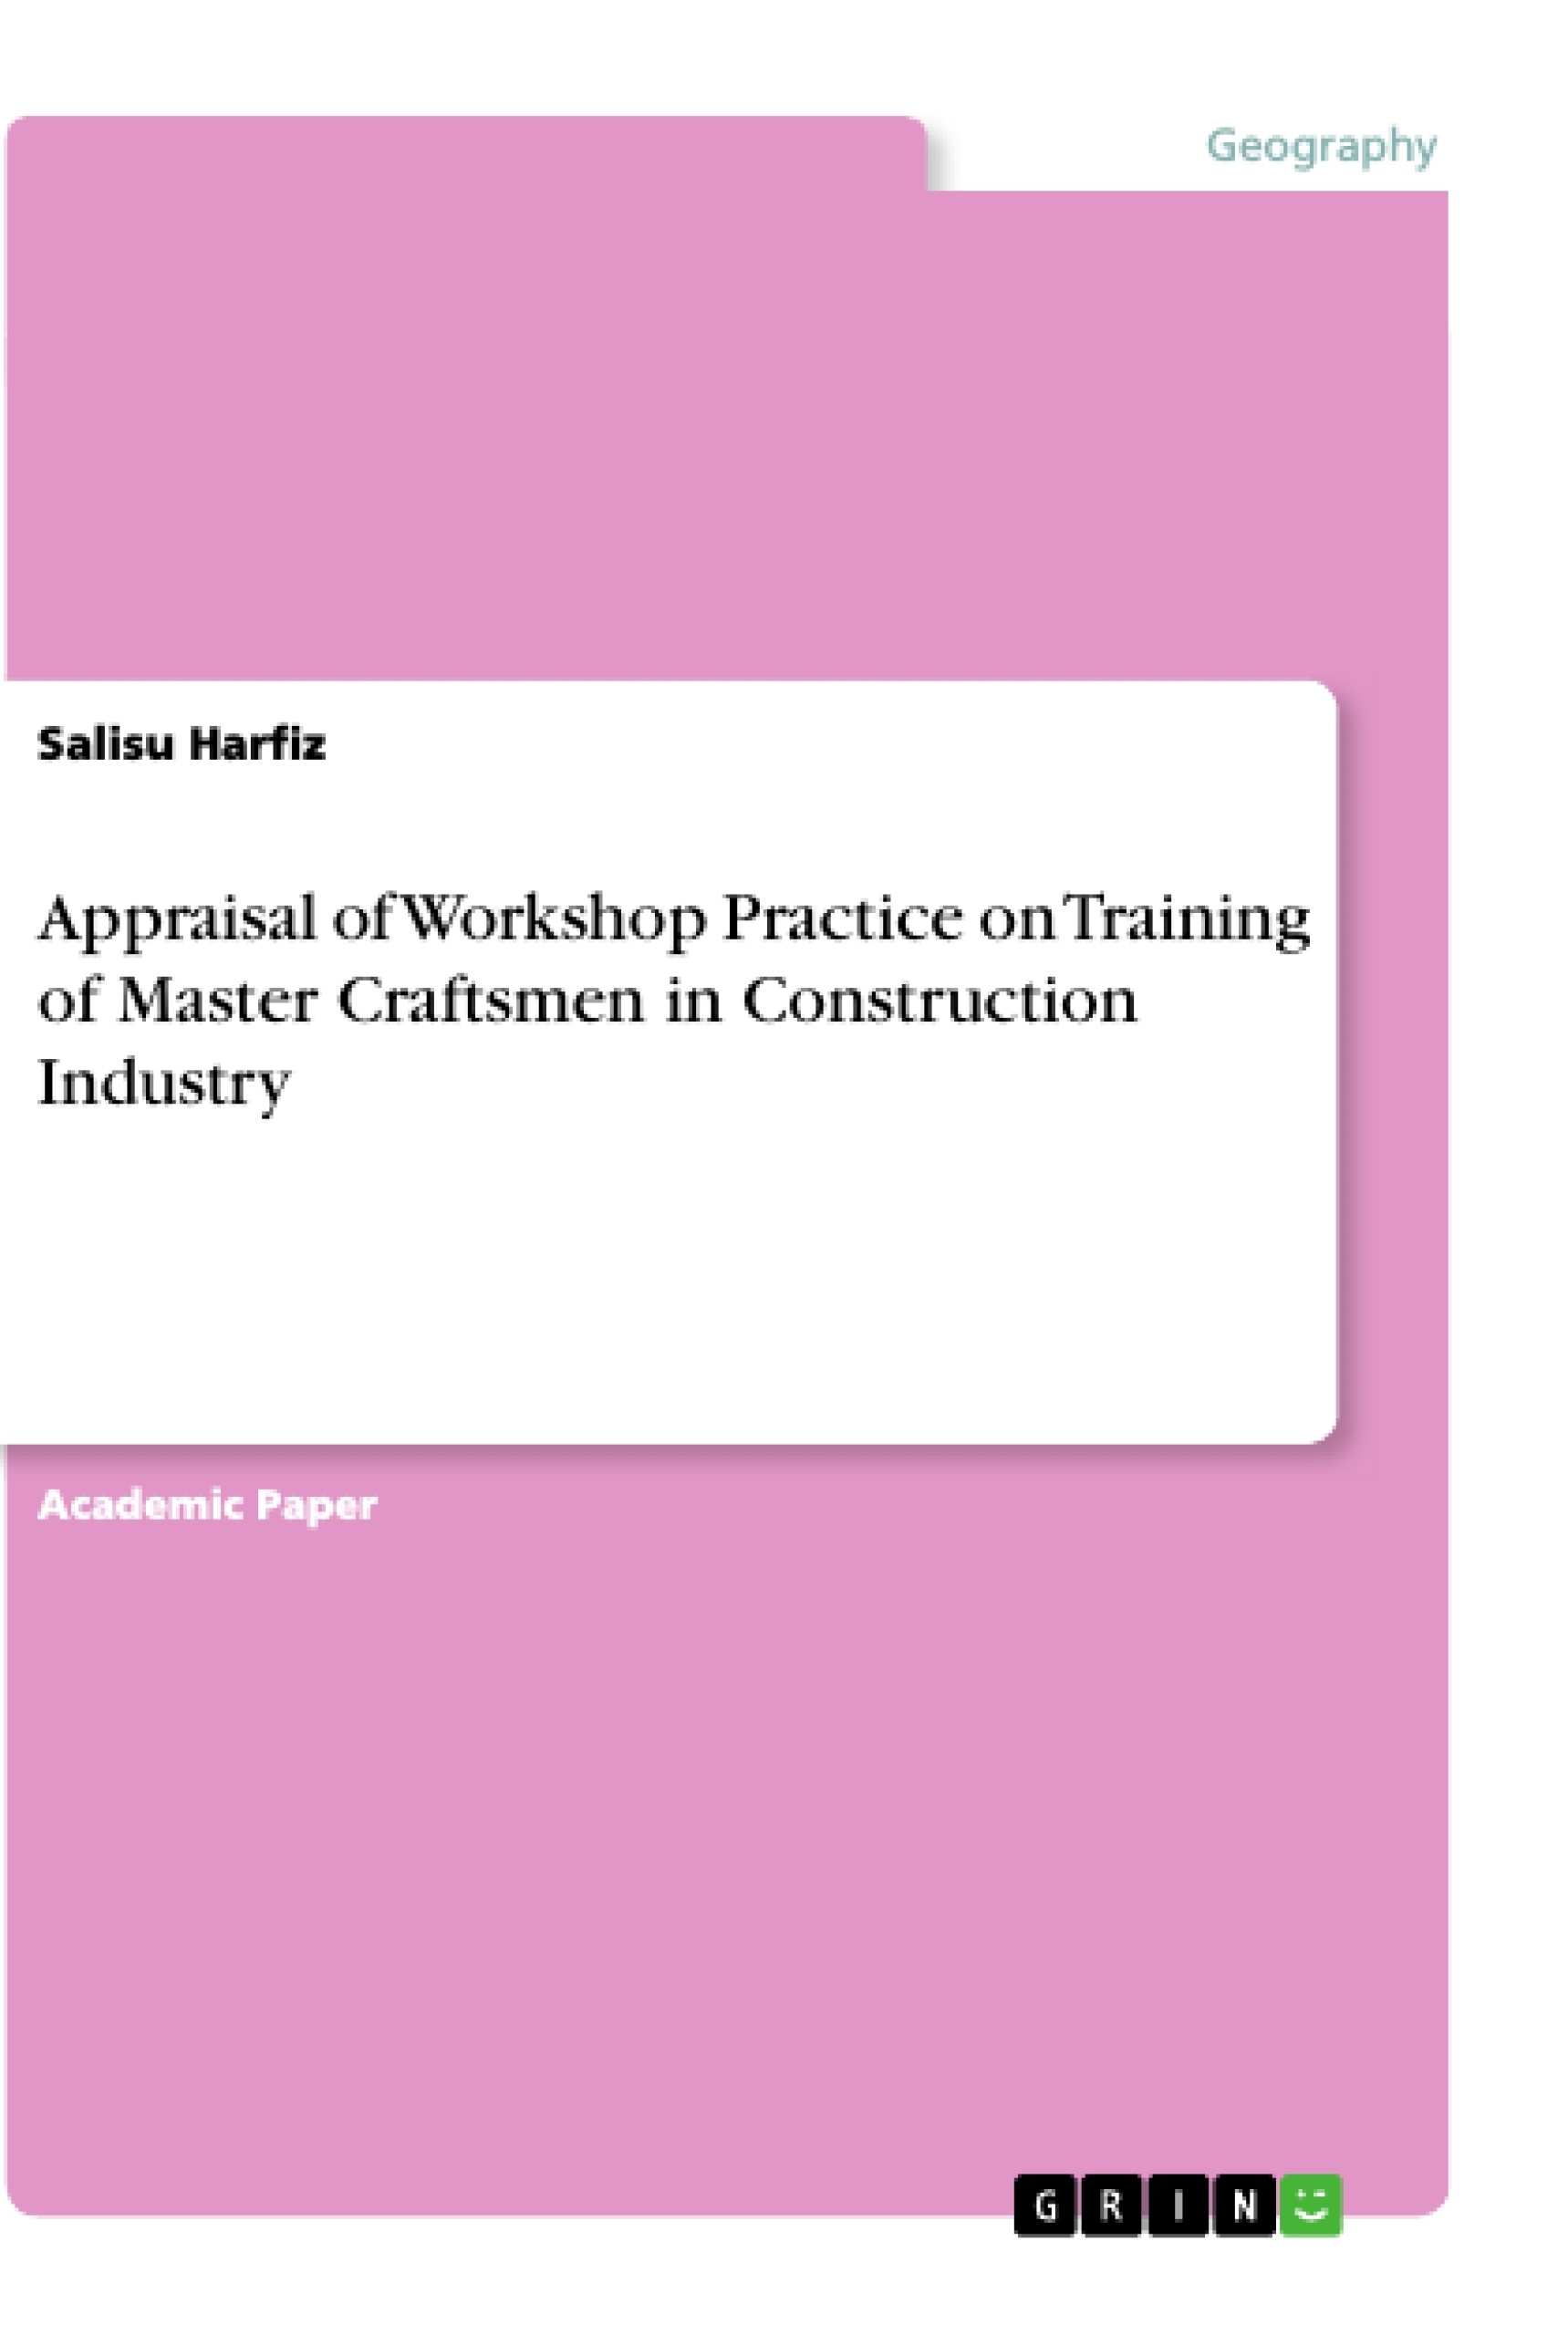 Título: Appraisal of Workshop Practice on Training of Master Craftsmen in Construction Industry